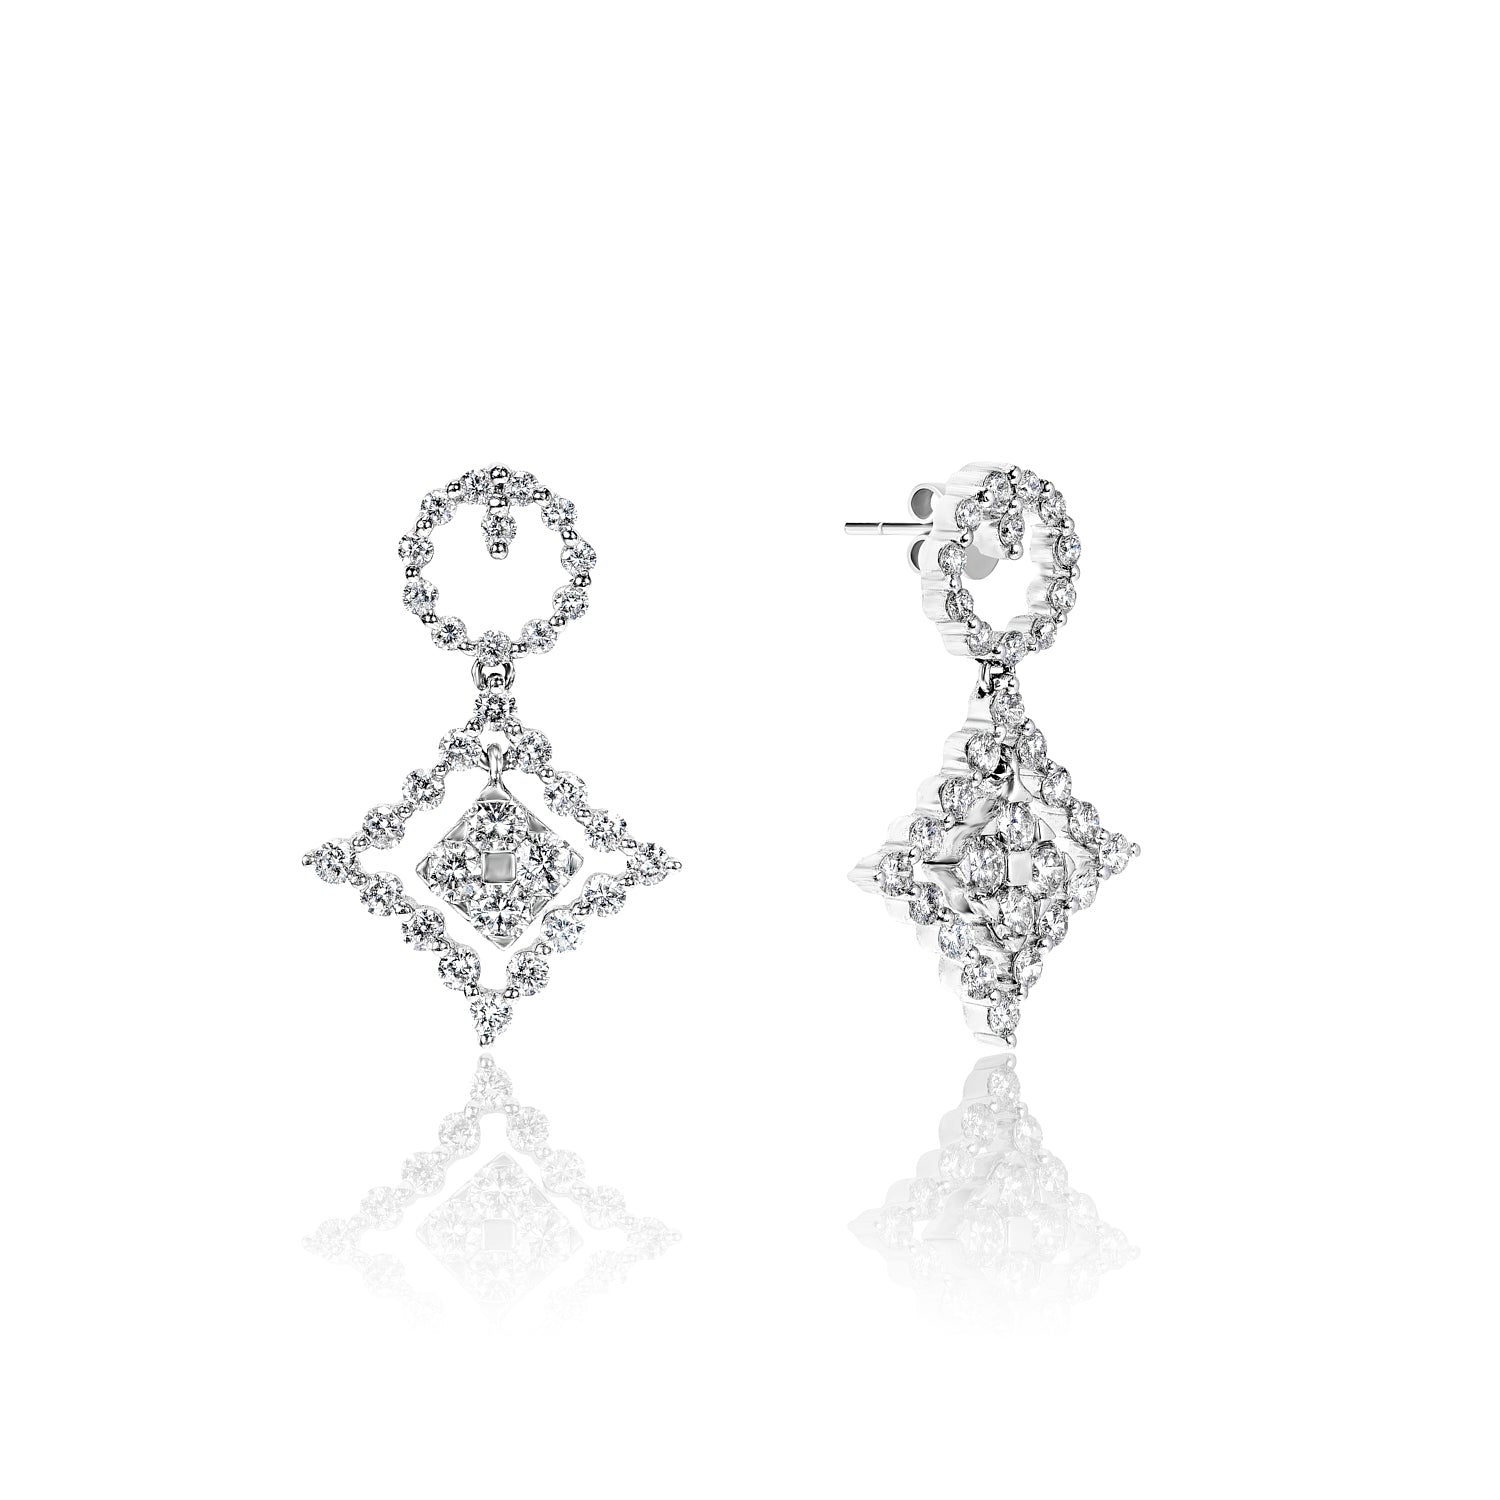 Emely 2 Carats Round Brilliant Cut Diamond Dangle Earrings in 18k White Gold Front and Side View